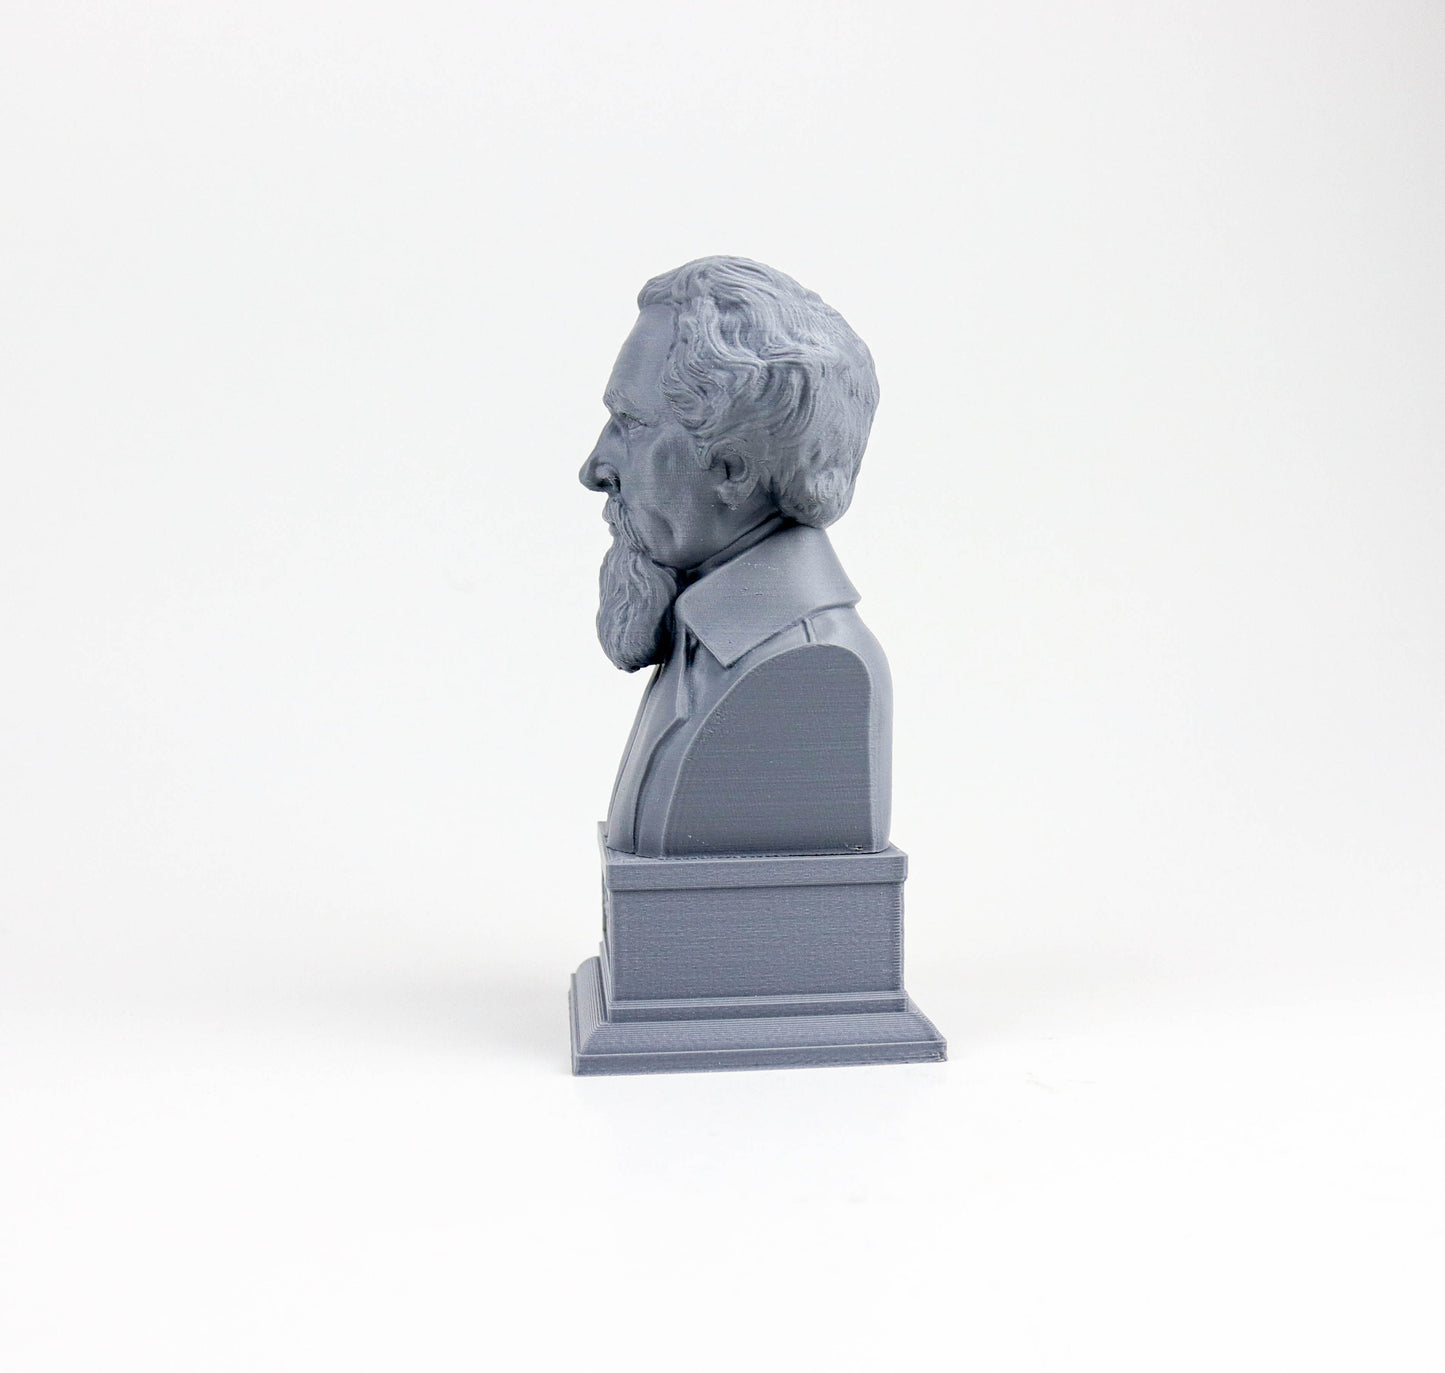 Charles Dickens Bust, English Writer and Social Critic Statue